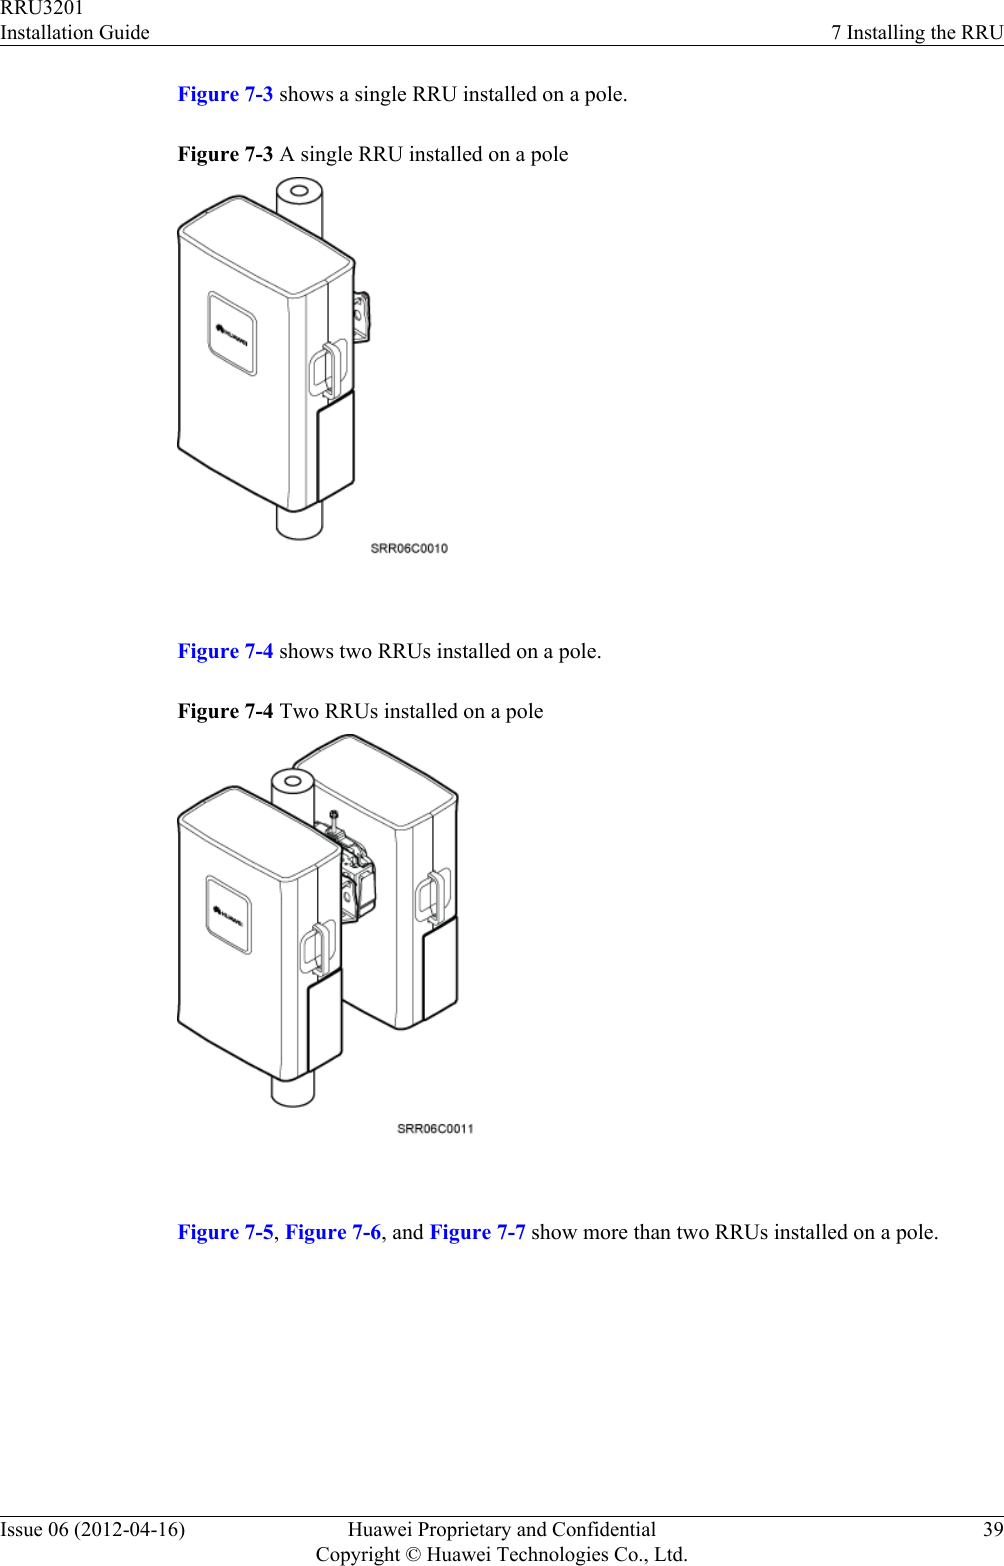 Figure 7-3 shows a single RRU installed on a pole.Figure 7-3 A single RRU installed on a pole Figure 7-4 shows two RRUs installed on a pole.Figure 7-4 Two RRUs installed on a pole Figure 7-5, Figure 7-6, and Figure 7-7 show more than two RRUs installed on a pole.RRU3201Installation Guide 7 Installing the RRUIssue 06 (2012-04-16) Huawei Proprietary and ConfidentialCopyright © Huawei Technologies Co., Ltd.39